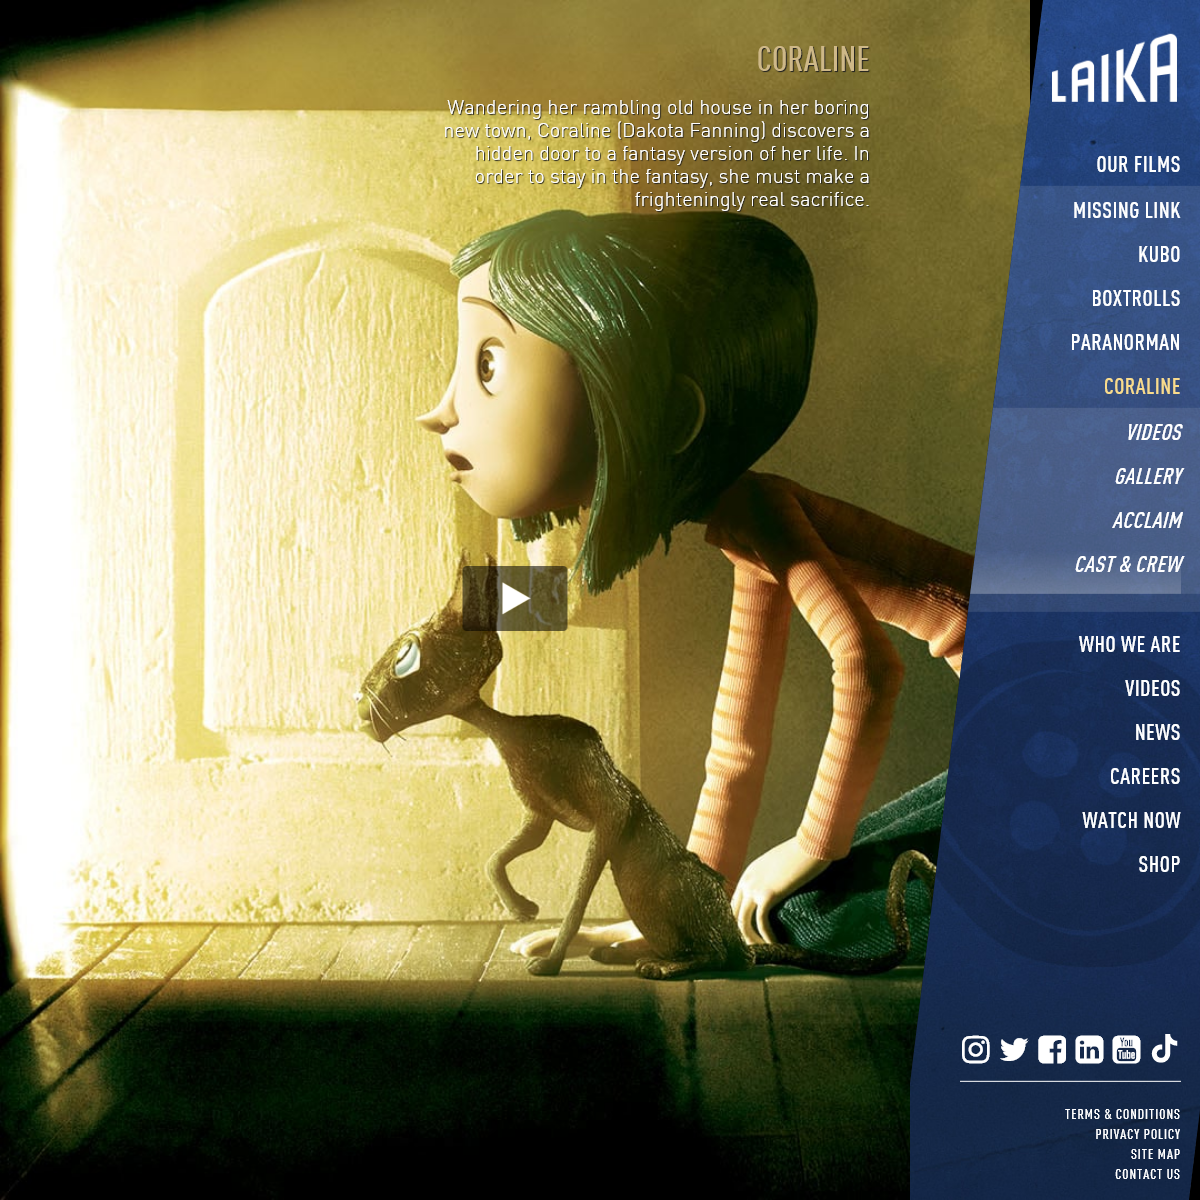 A complete backup of coraline.com